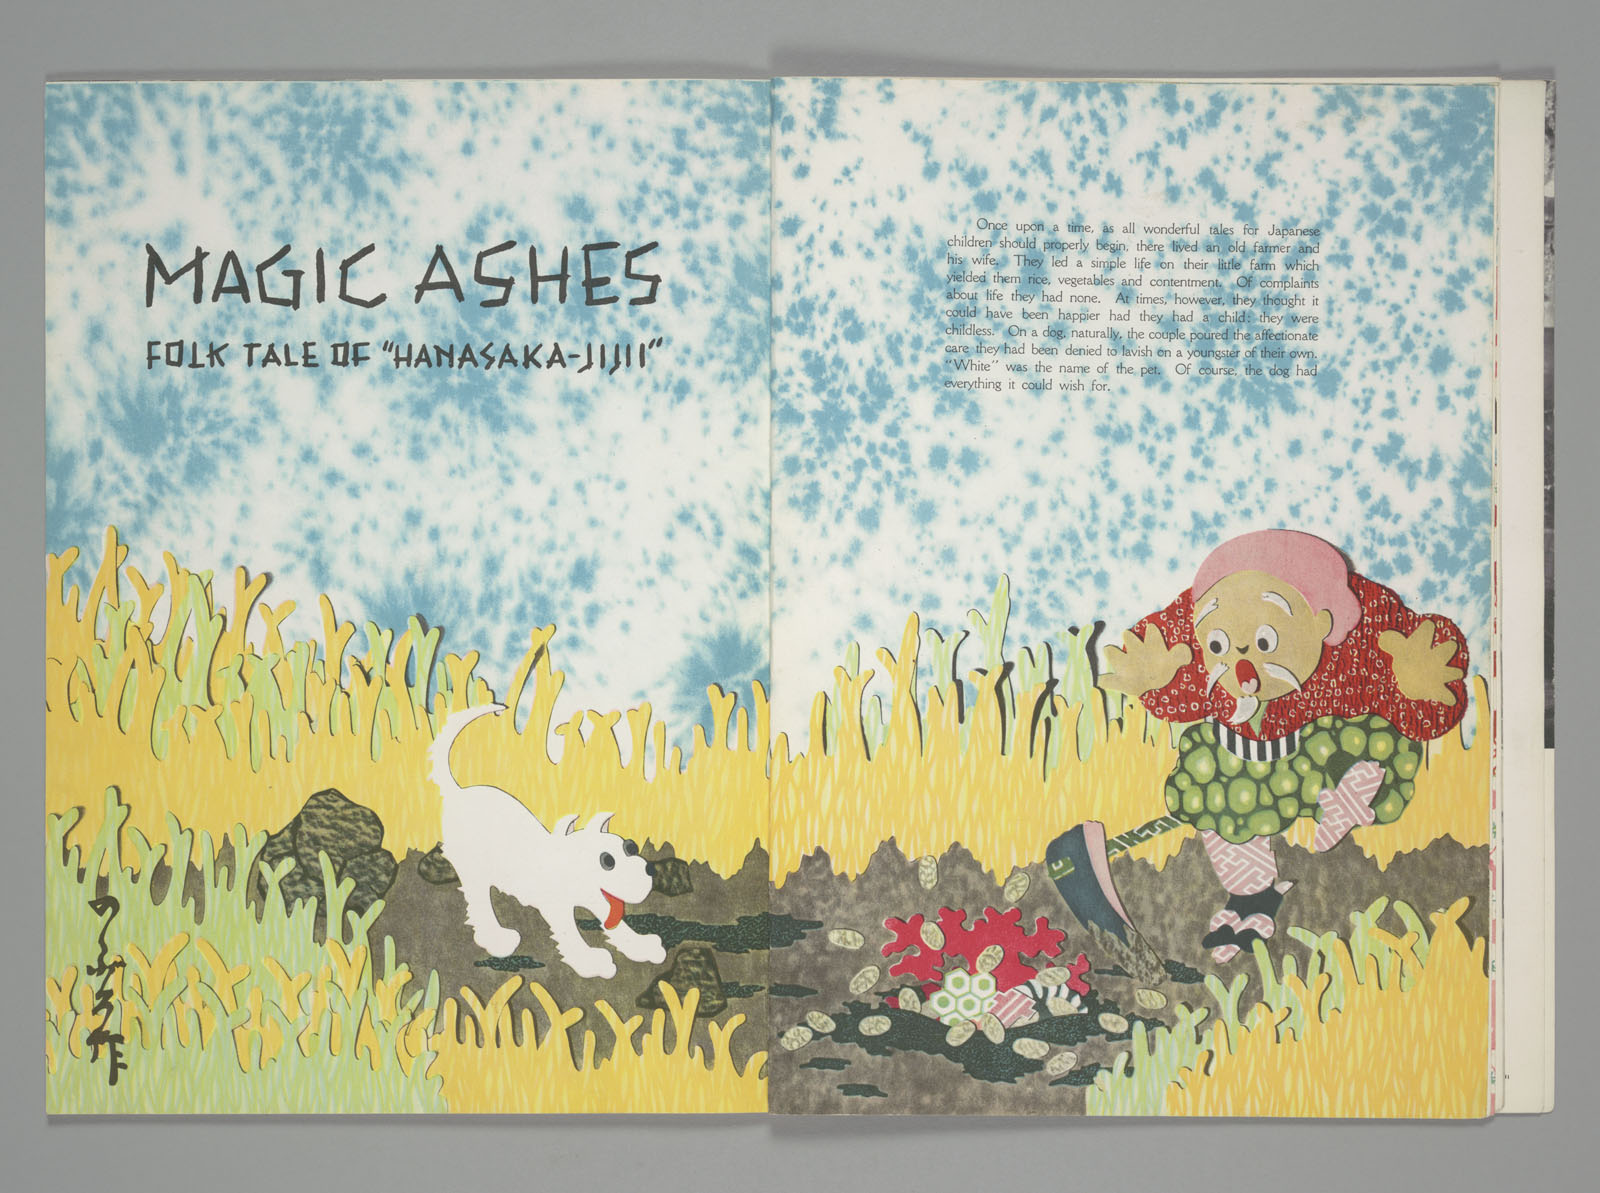 "MAGIC ASHES" <i>Travel in Japan</i> Spring issue, 1936